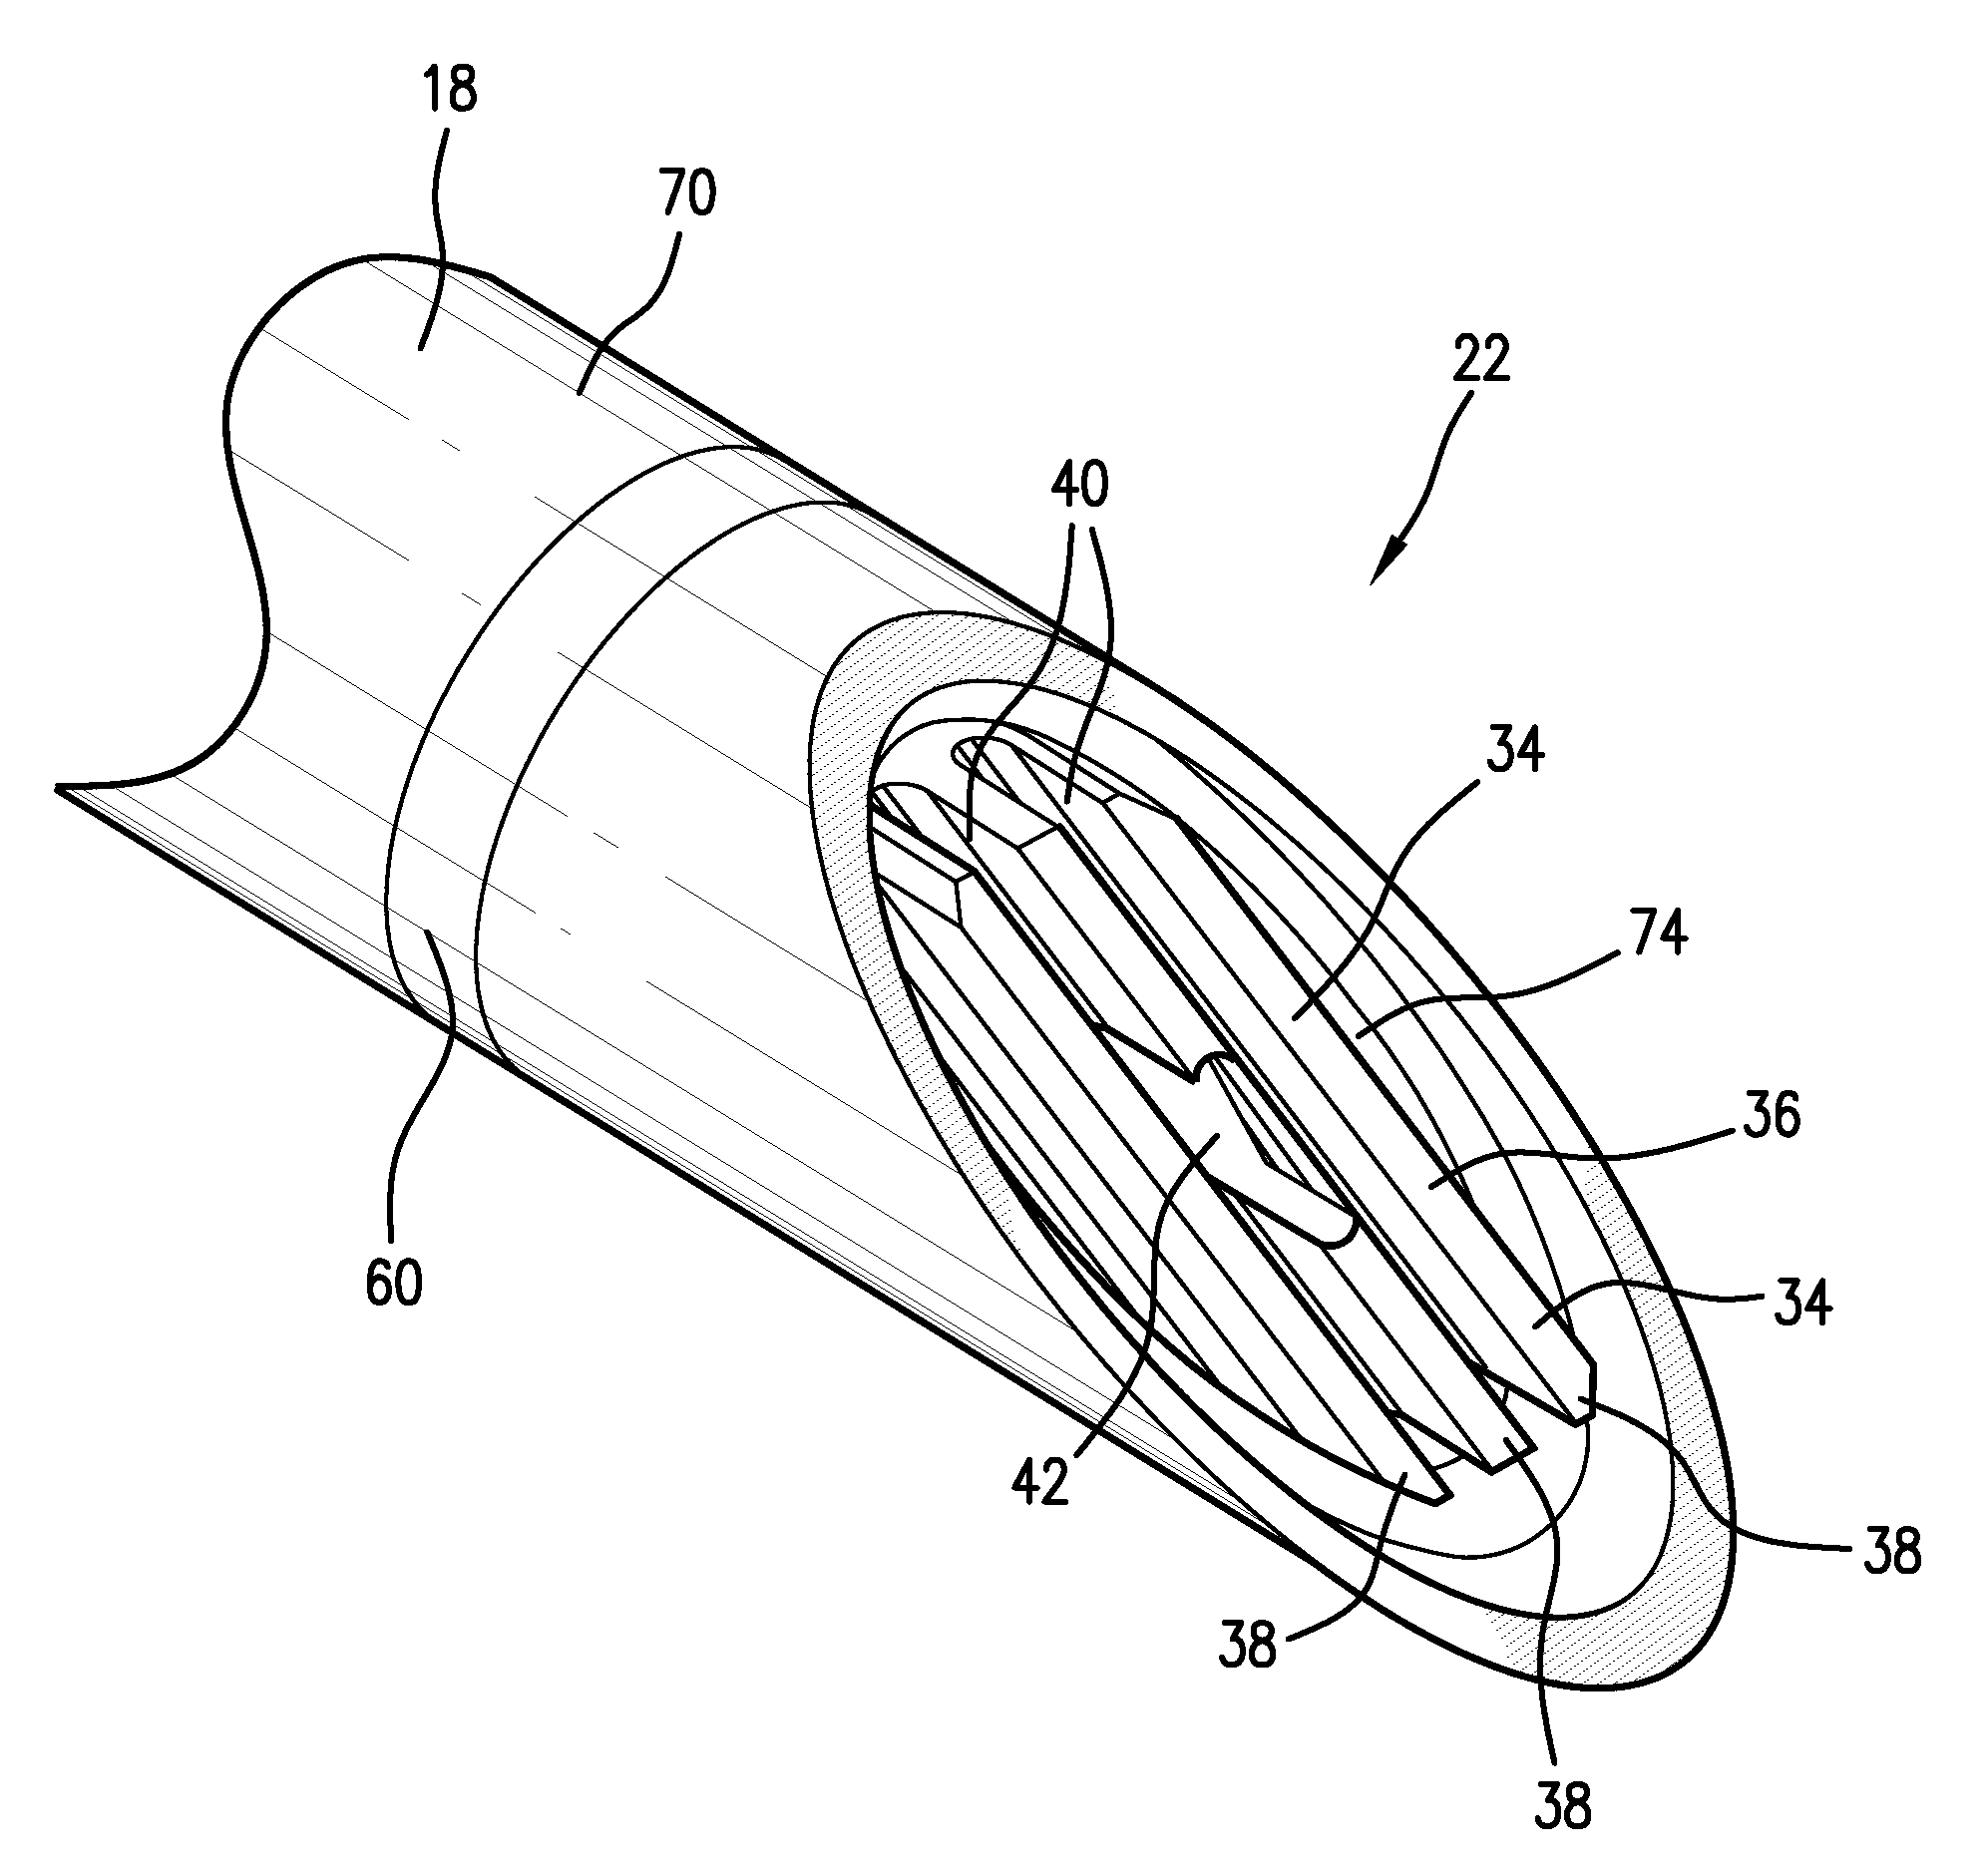 Electrosurgical device with floating-potential electrode and methods of using the same